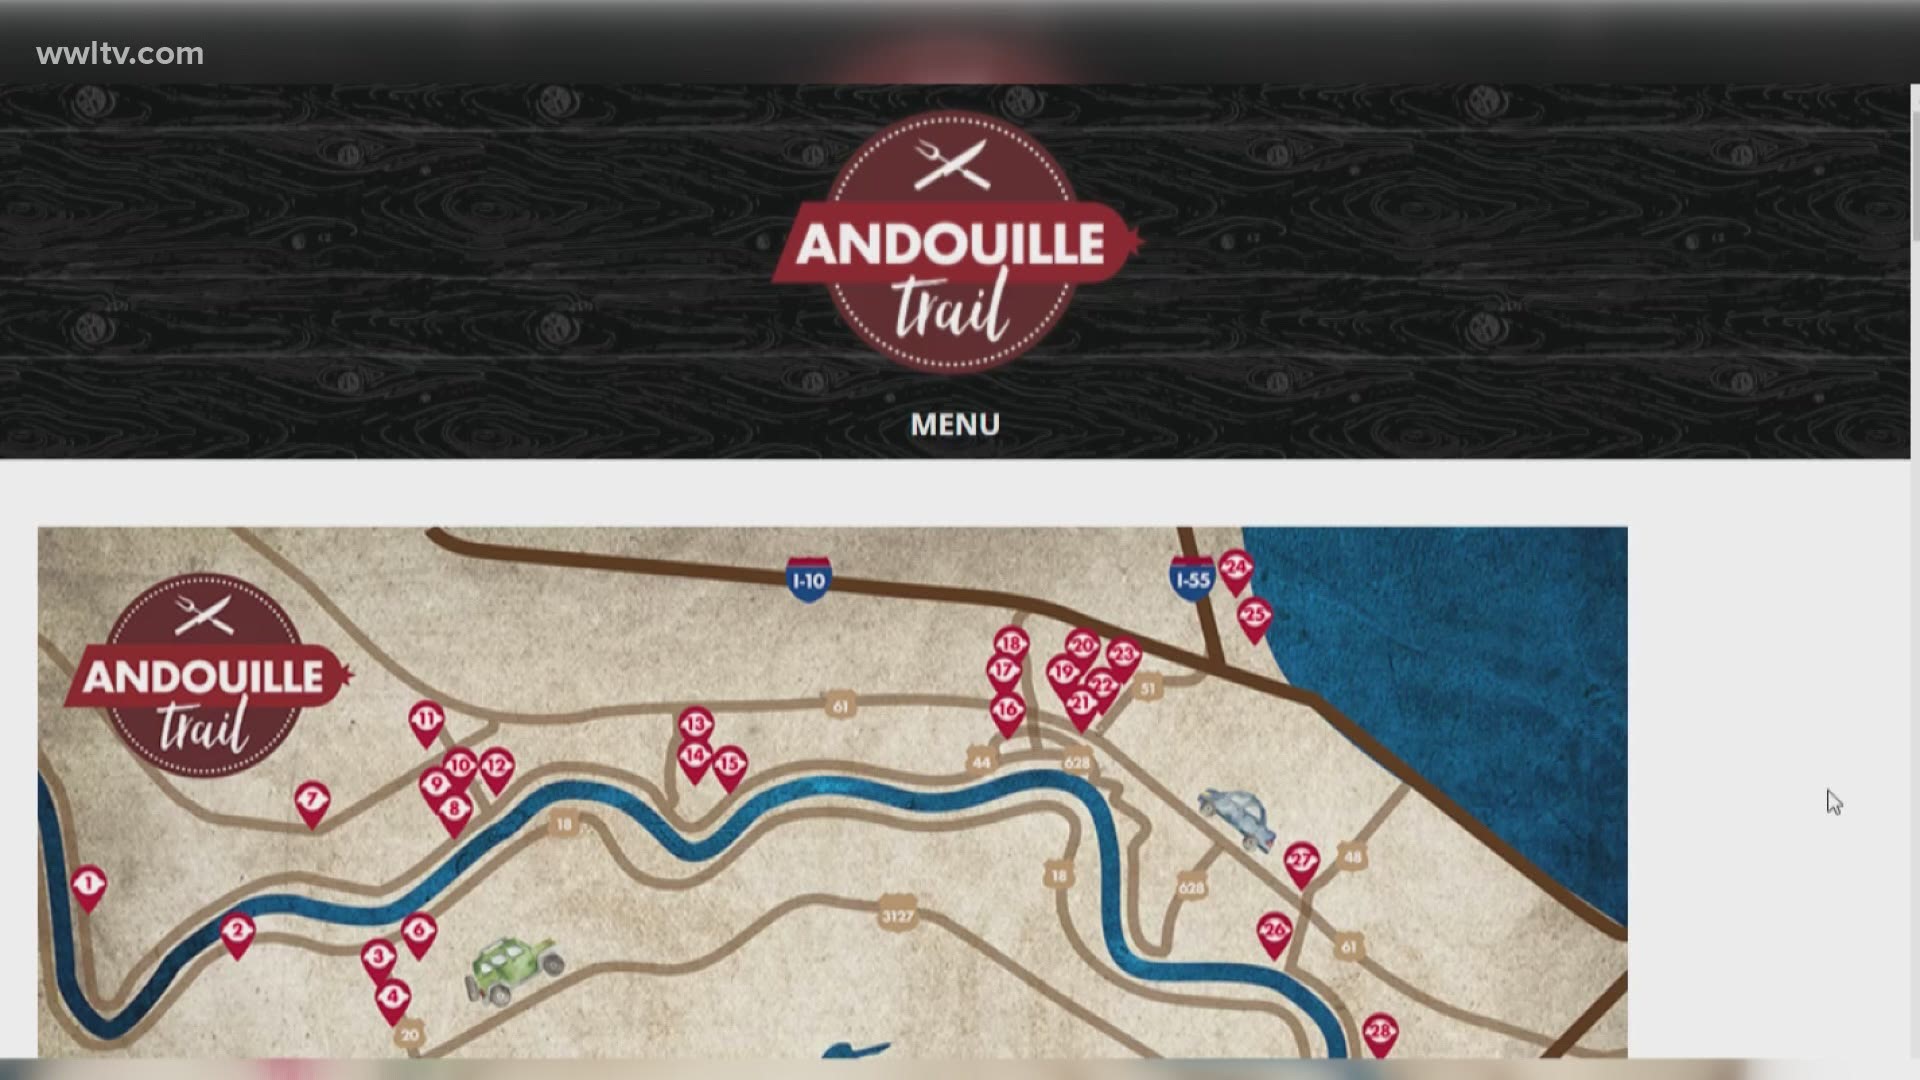 Similar to the Golf trails, there is now an Andouille trail showing you where to get the best andouille - even if you want it shipped online.